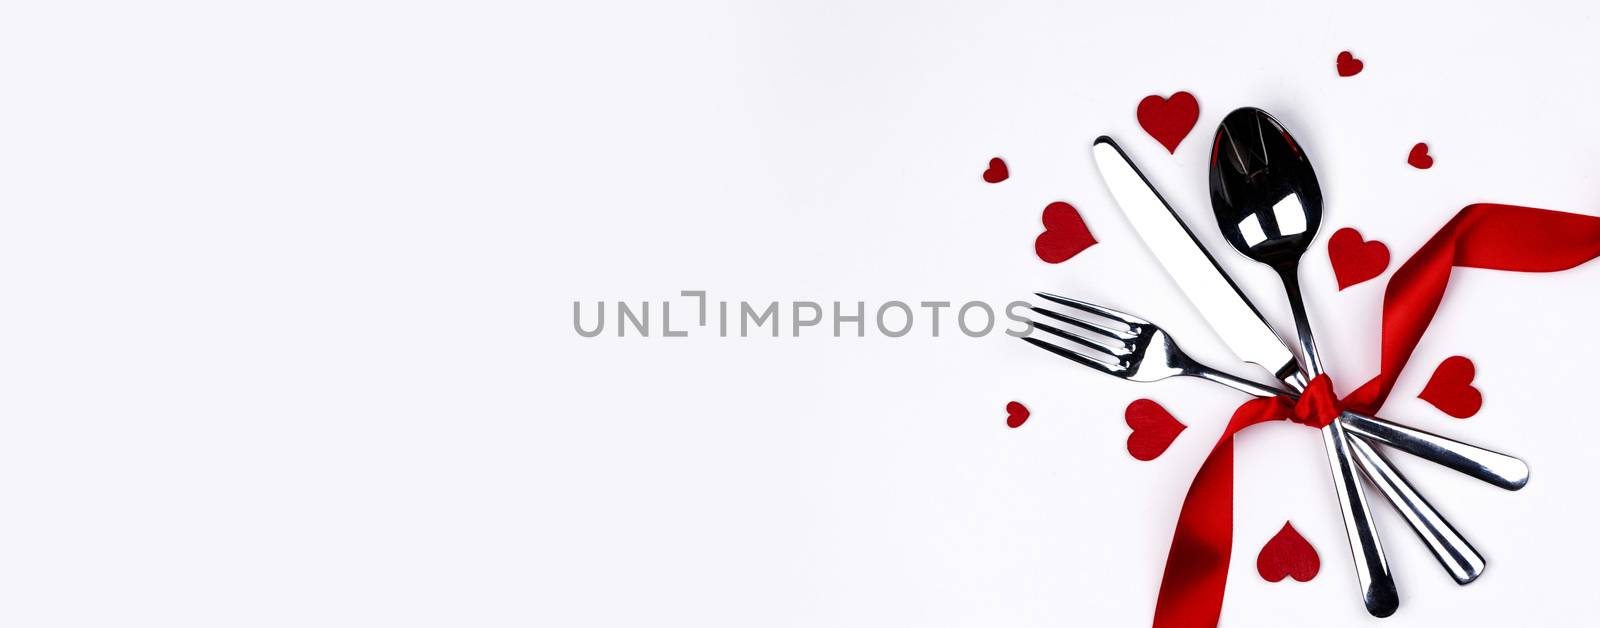 Cutlery set tied with silk ribbon and hearts isolated on white background Valentine day romantic dinner concept